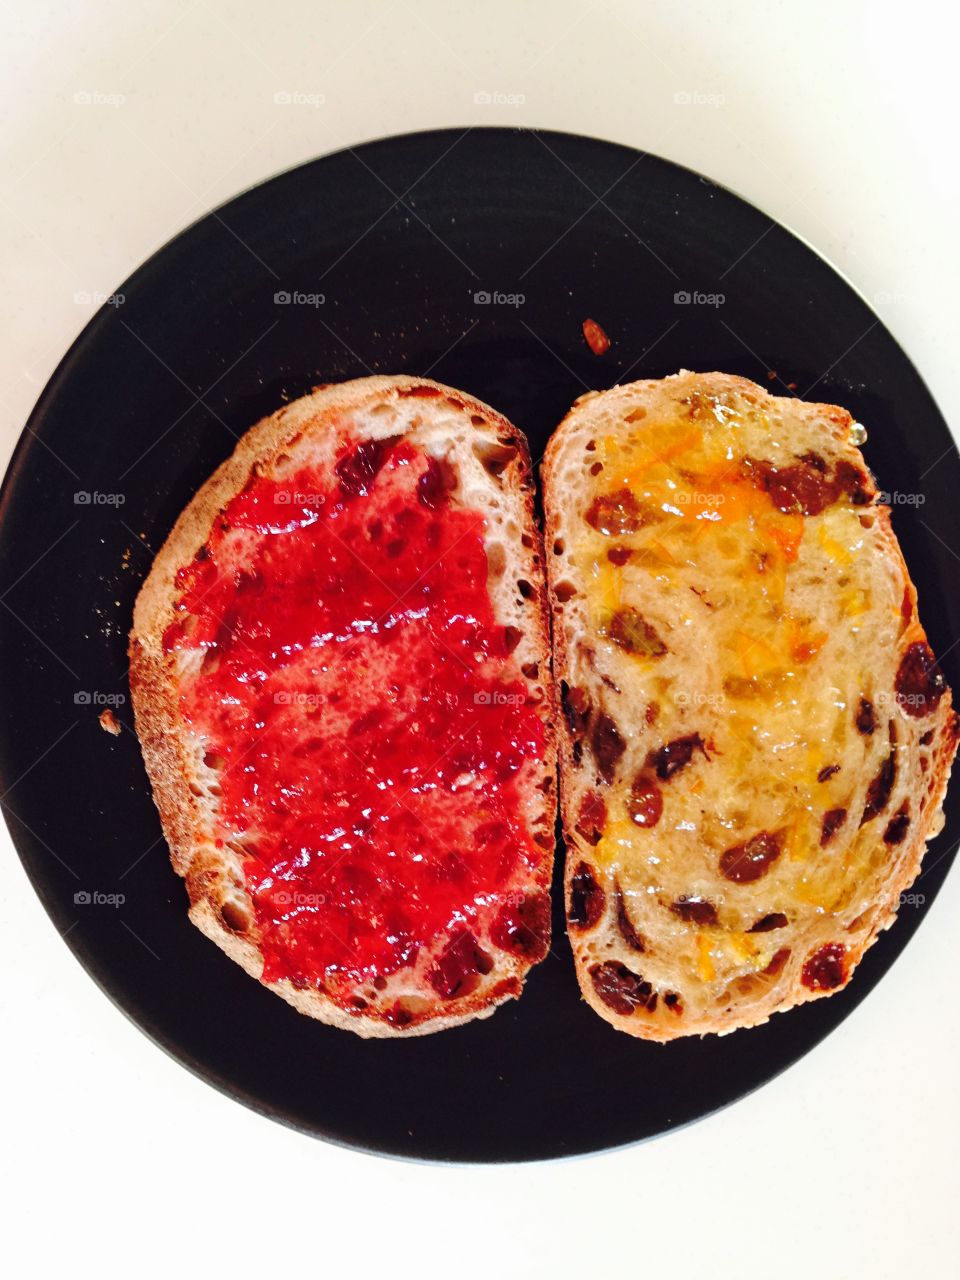 lusterl. Strawberry jam and marmalade on toast